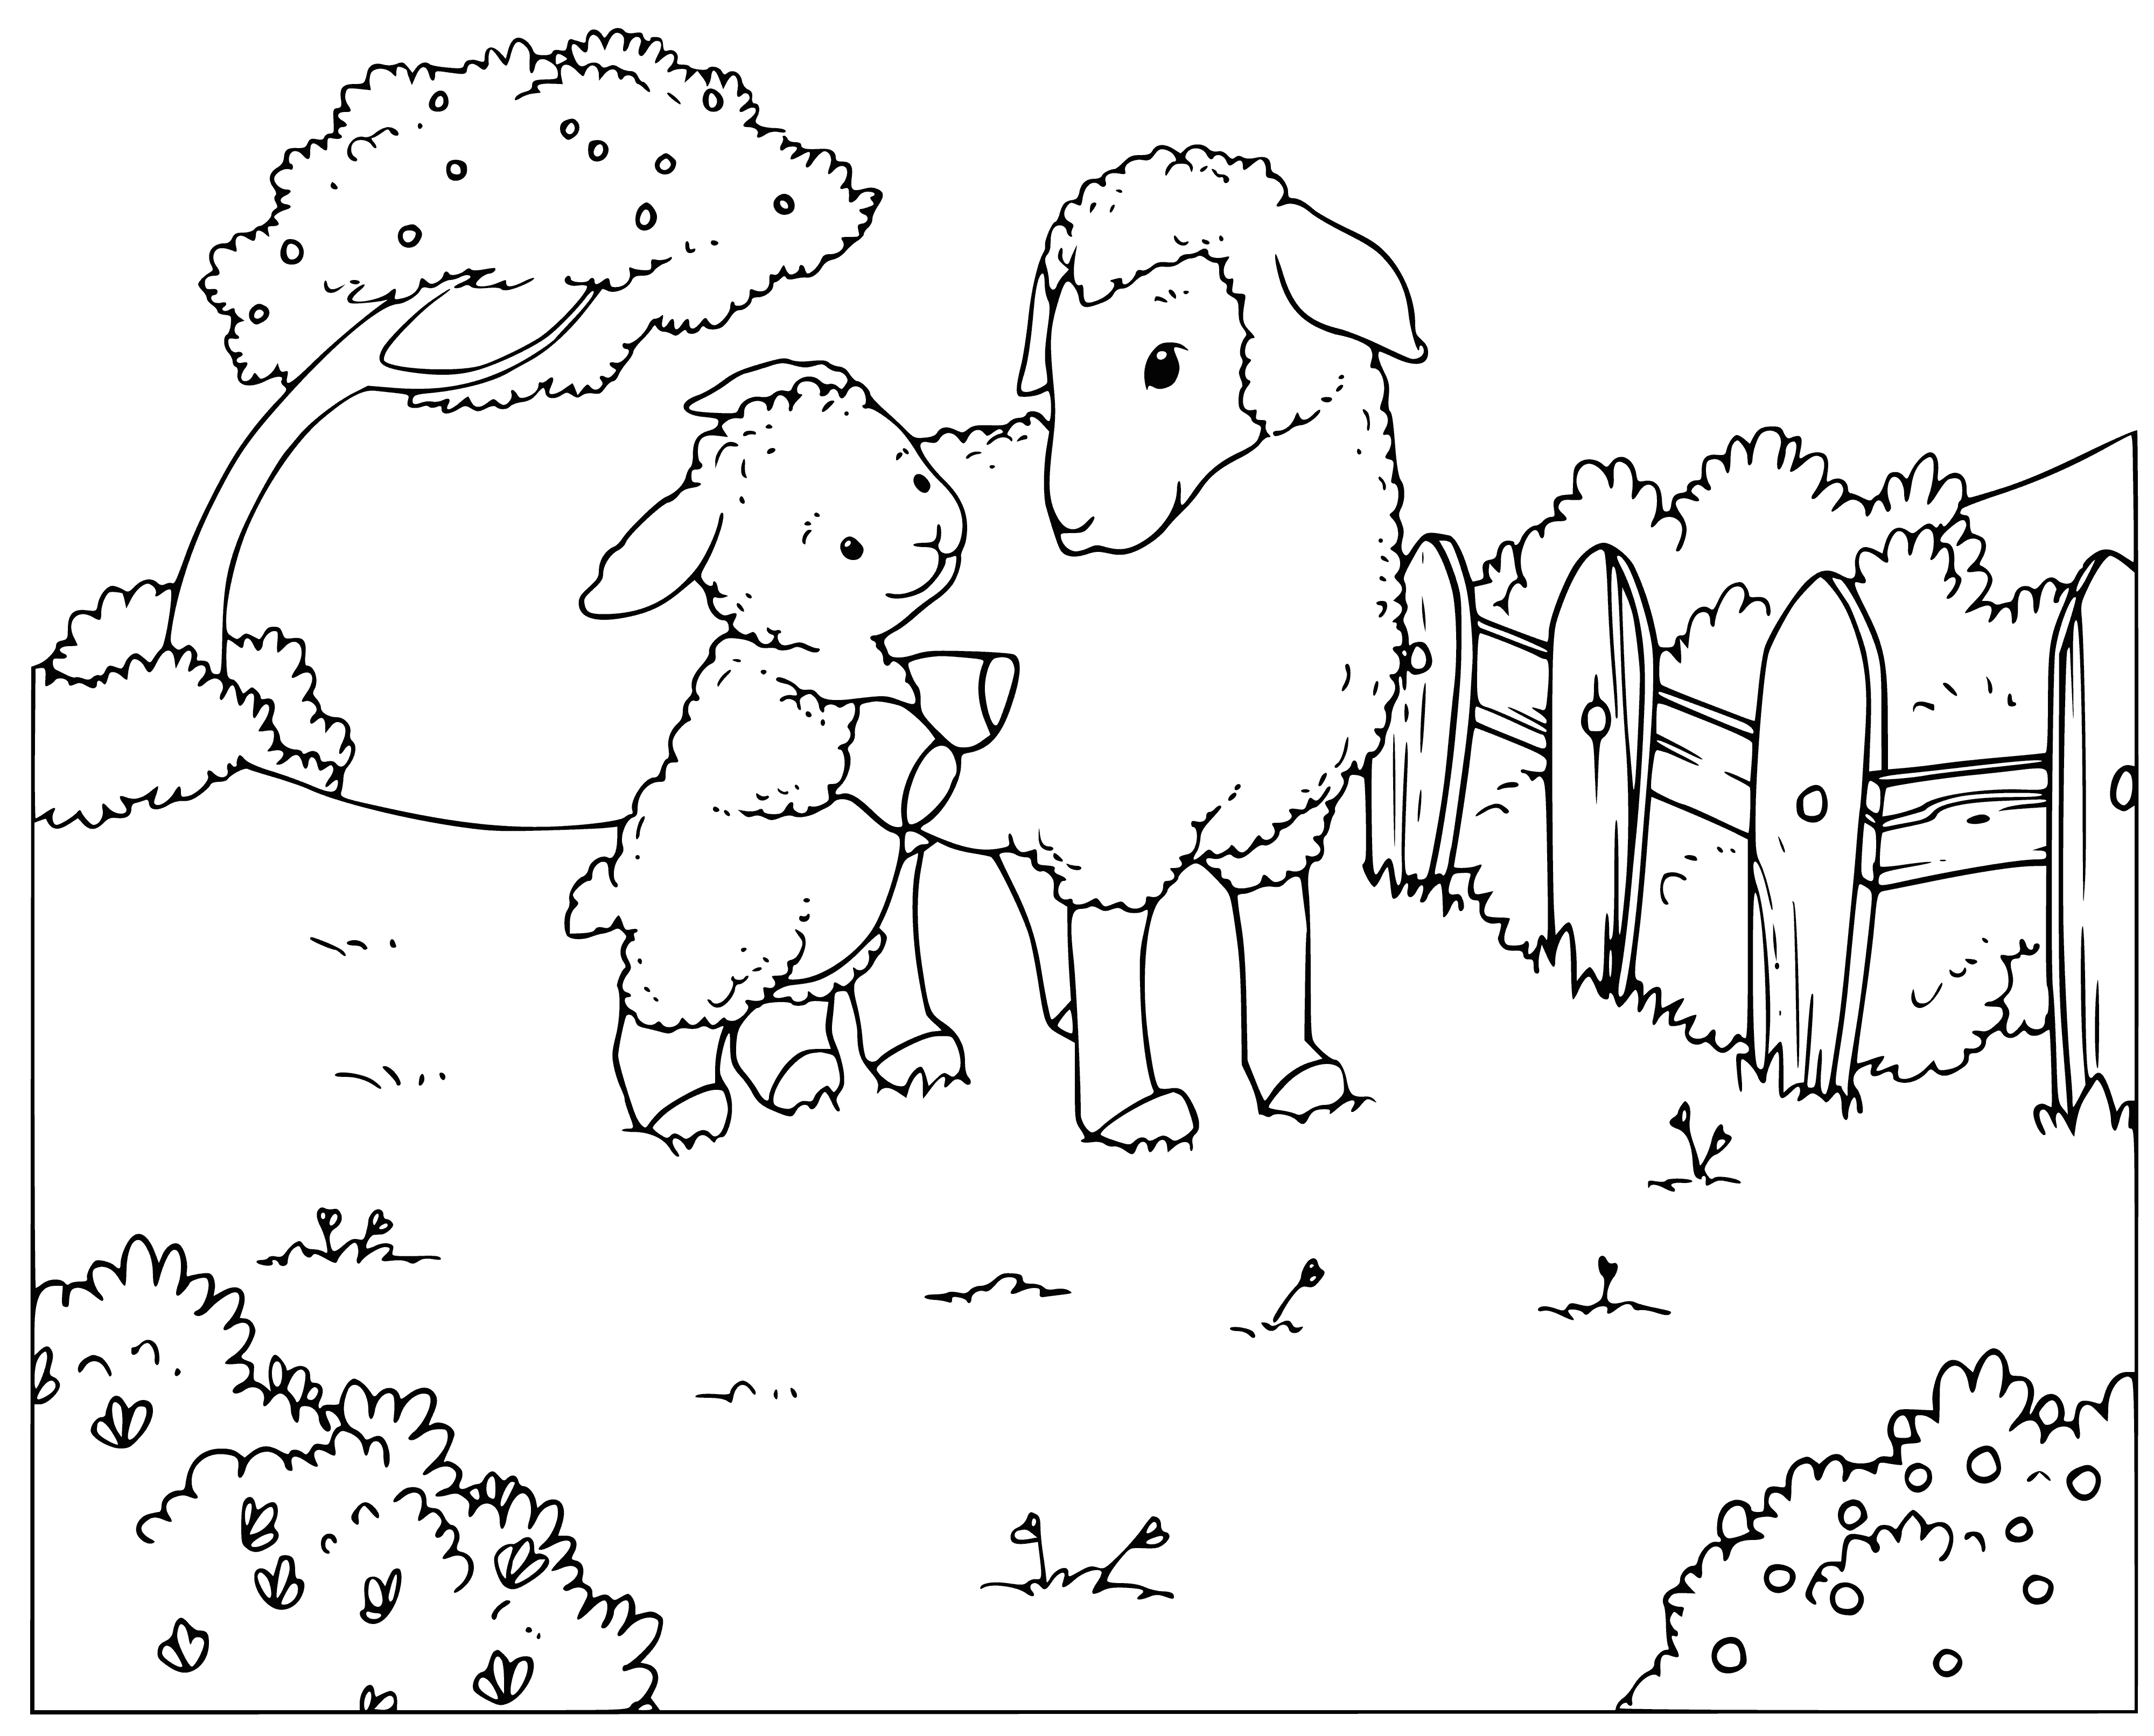 coloring page: Sheep & goats of all colors eating oats & barley from ground & troughs, with trees & mountains in the background.